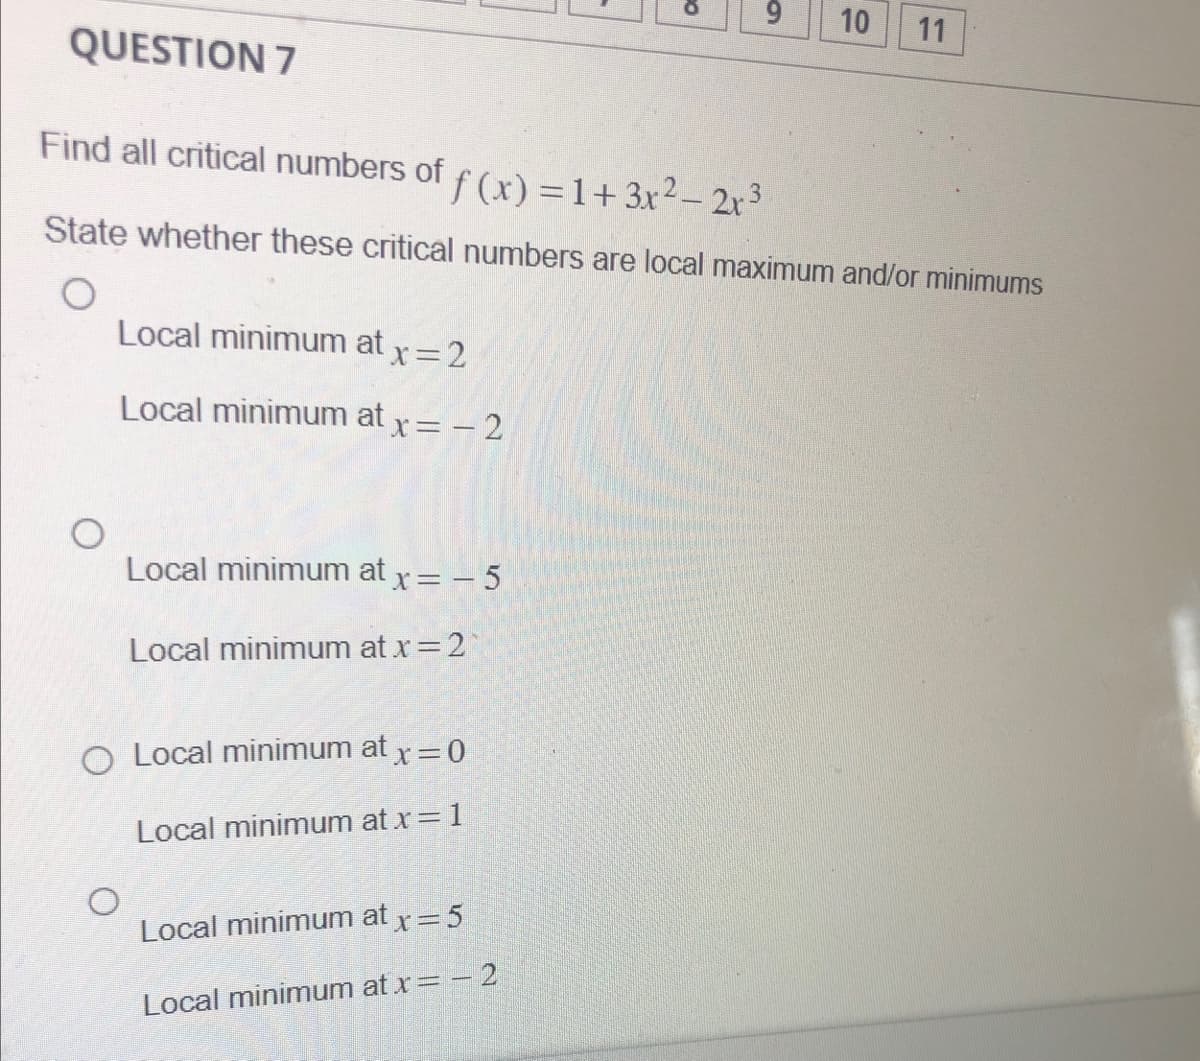 O
Local minimum at x = 2
Local minimum at x = -2
QUESTION 7
Find all critical numbers of f(x) = 1 + 3x² − 2x³
State whether these critical numbers are local maximum and/or minimums
Local minimum at x = -5
Local minimum at x = 2*
O Local minimum at x = 0
Local minimum at x = 1
O
CO
Local minimum at x = 5
Local minimum at x = -2
6
10
11